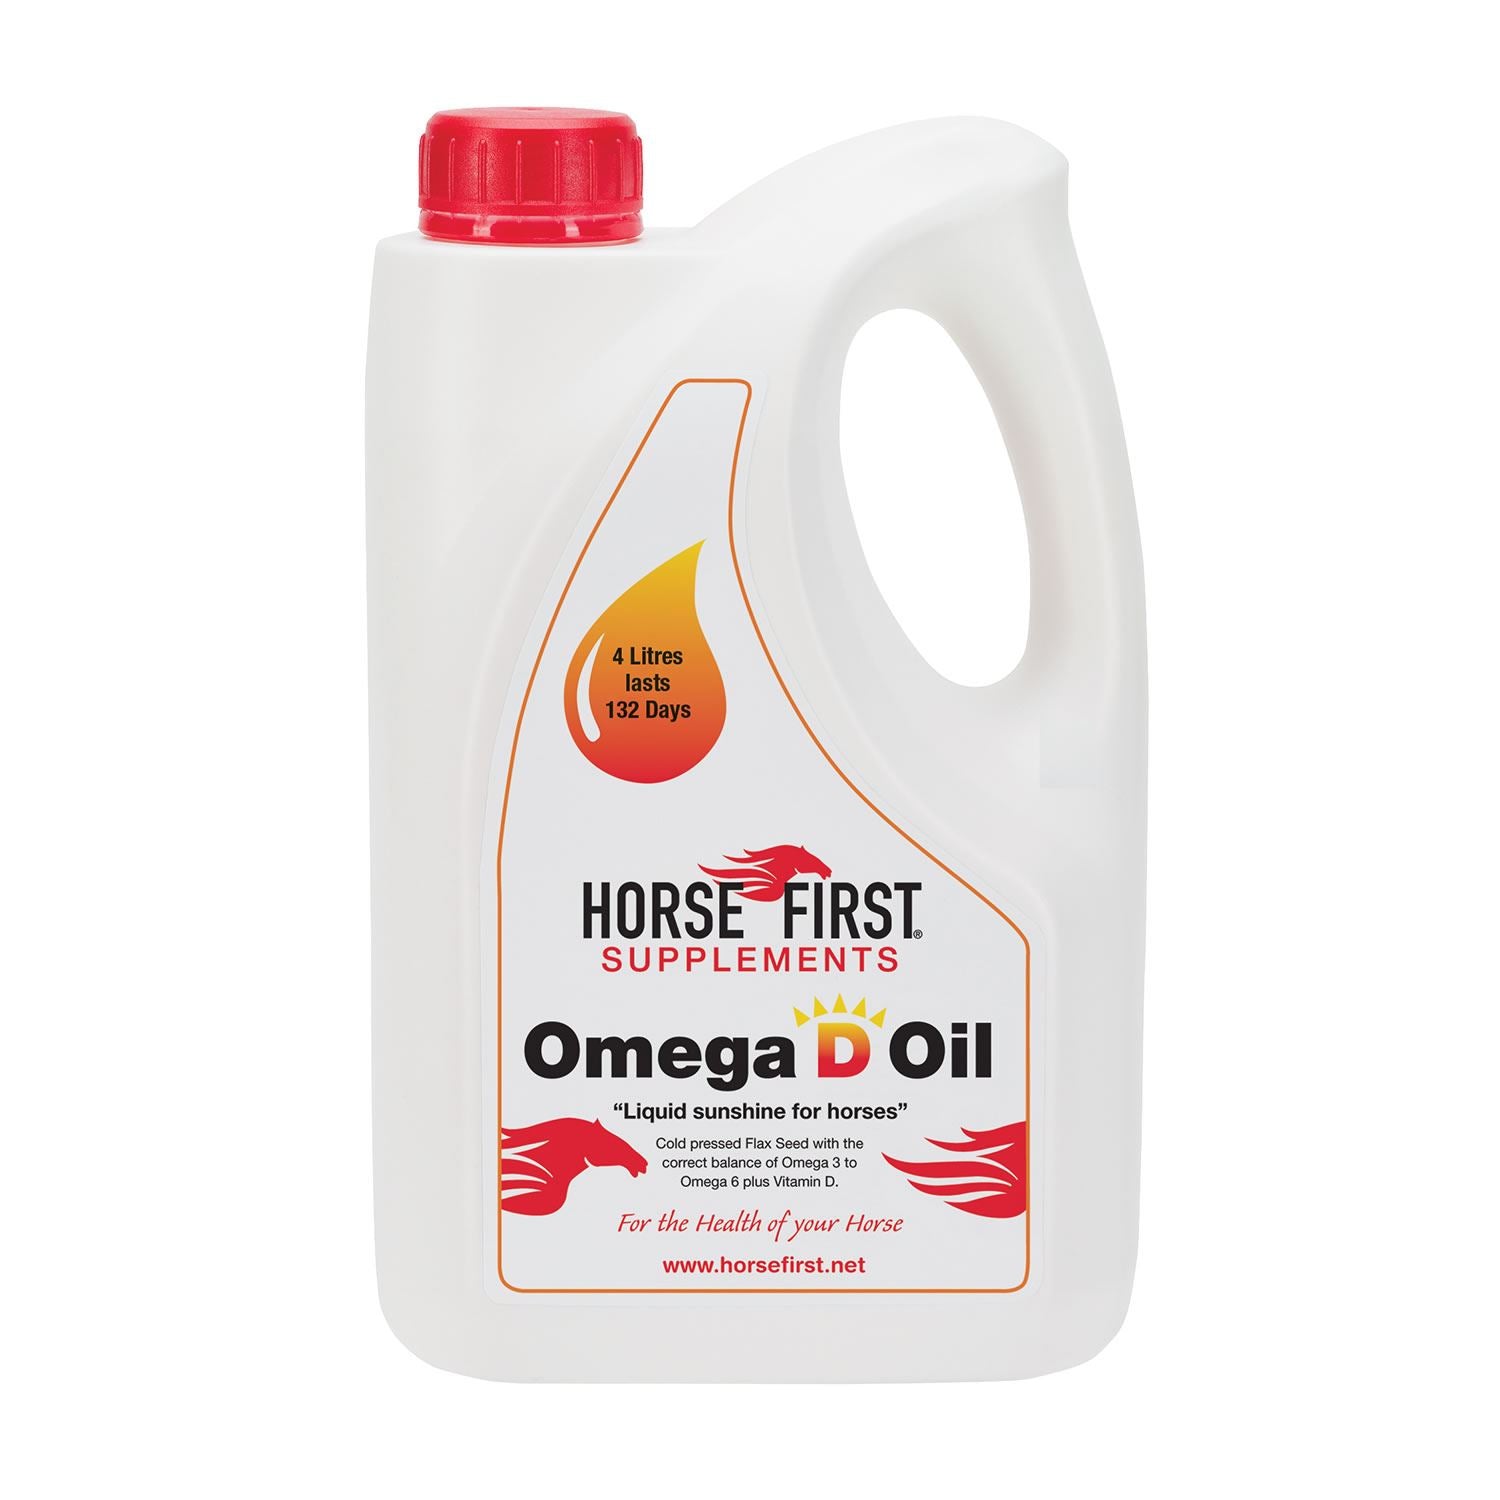 Horse First Omega D Oil enhances coat and overall health with essential fatty acids